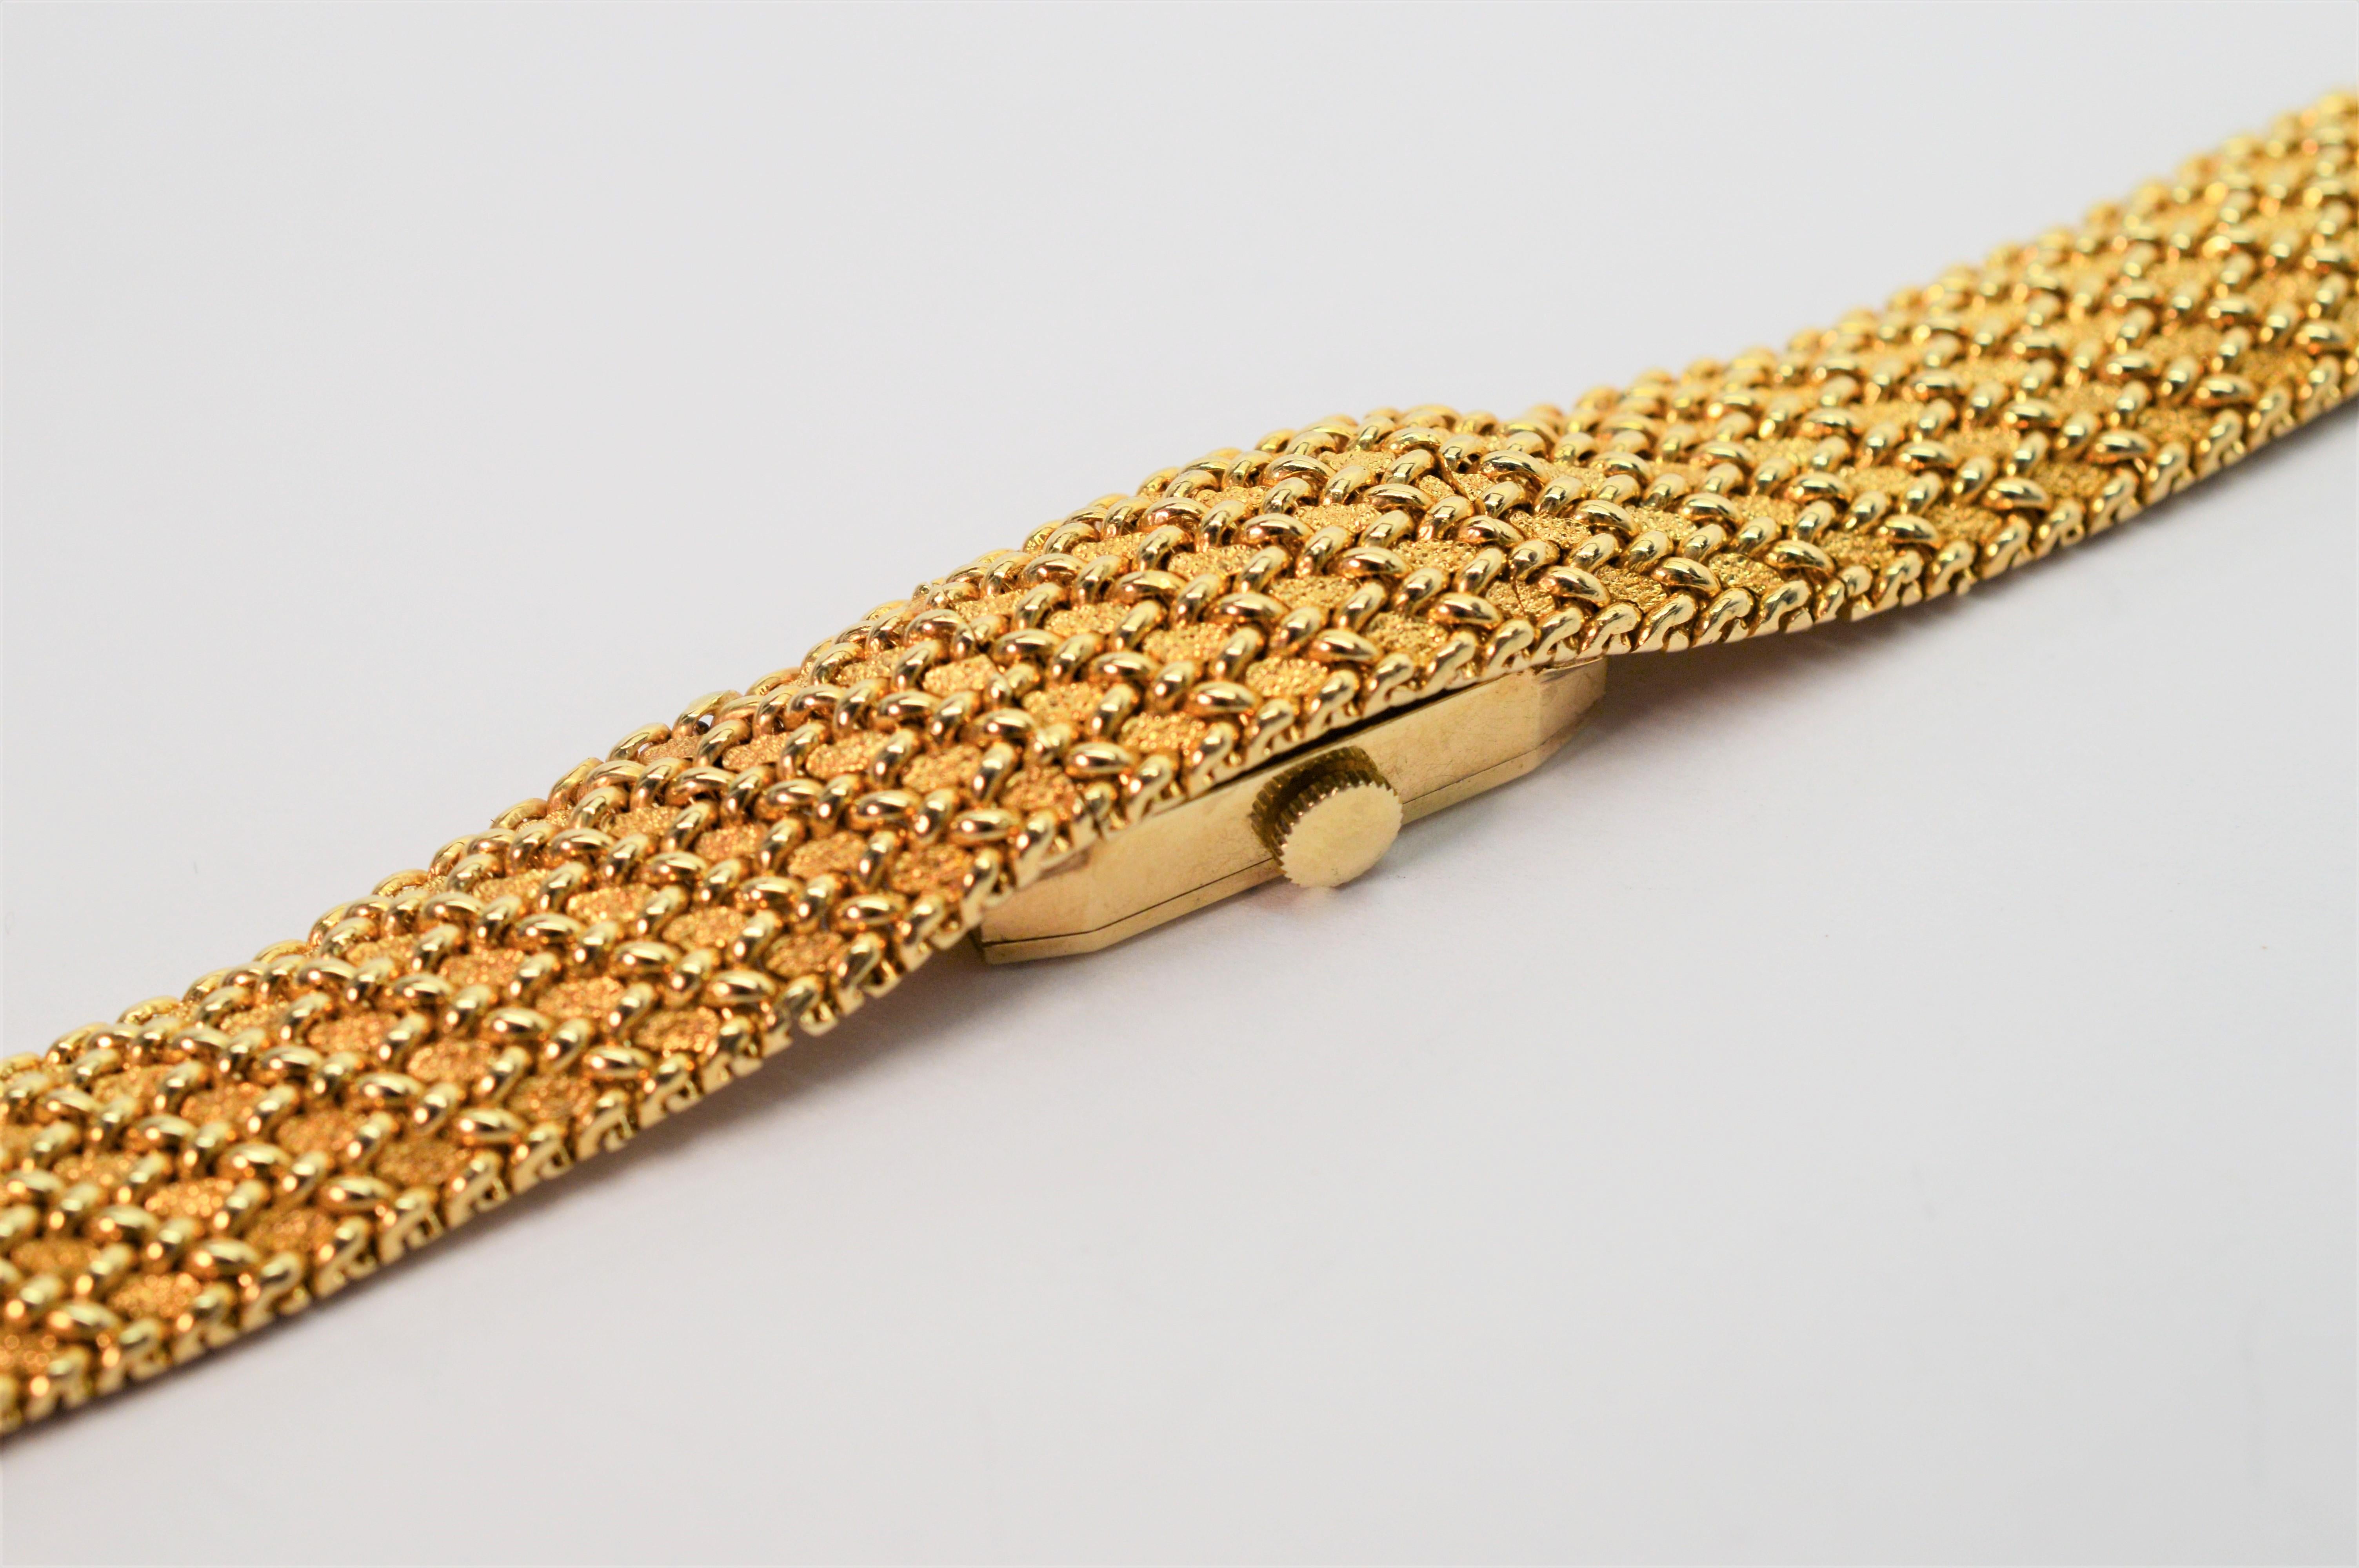 Wear the time with true elegance. A fine woven gold mesh bracelet in fourteen karat yellow gold makes an elegant piece to accessorize for any occasion. Intricately integrated into this smart looking bracelet is a hidden watch by Swiss luxury